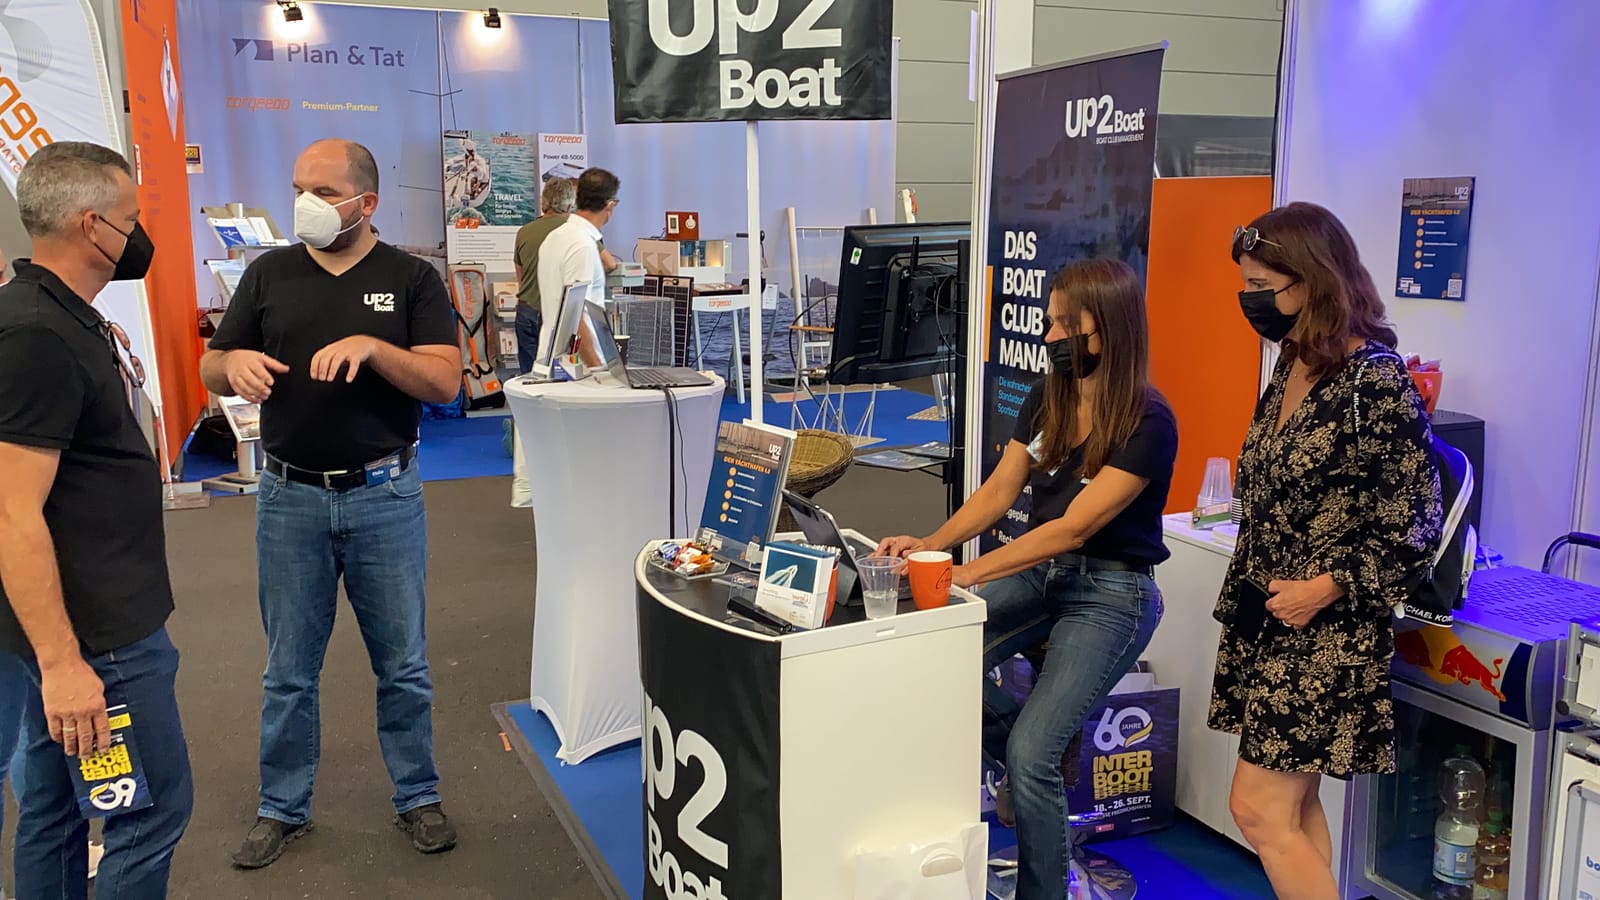 Up2Boat@Interboot 2021